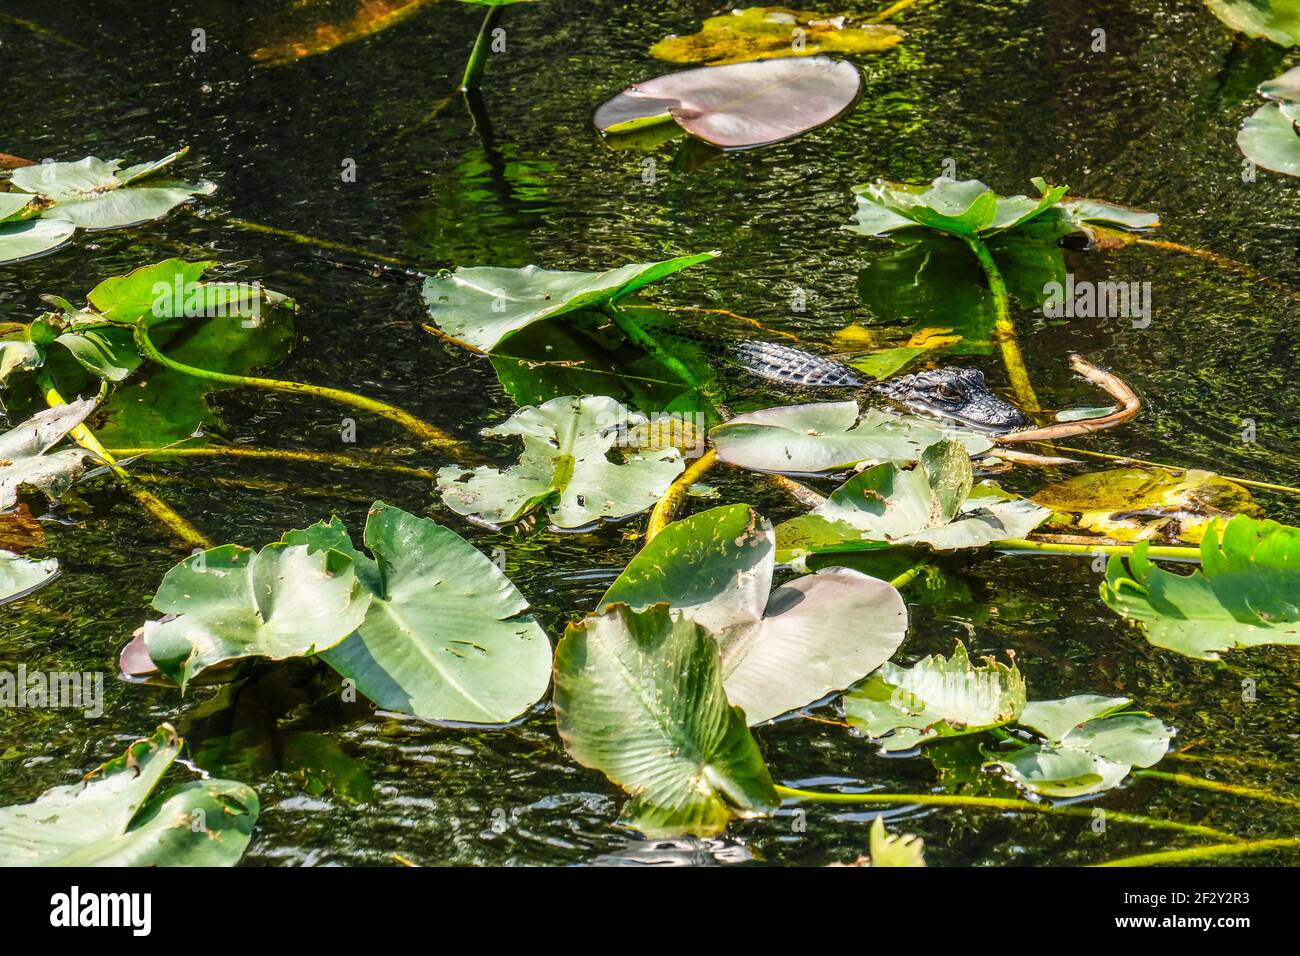 A young American crocodile in water under lily pads Stock Photo